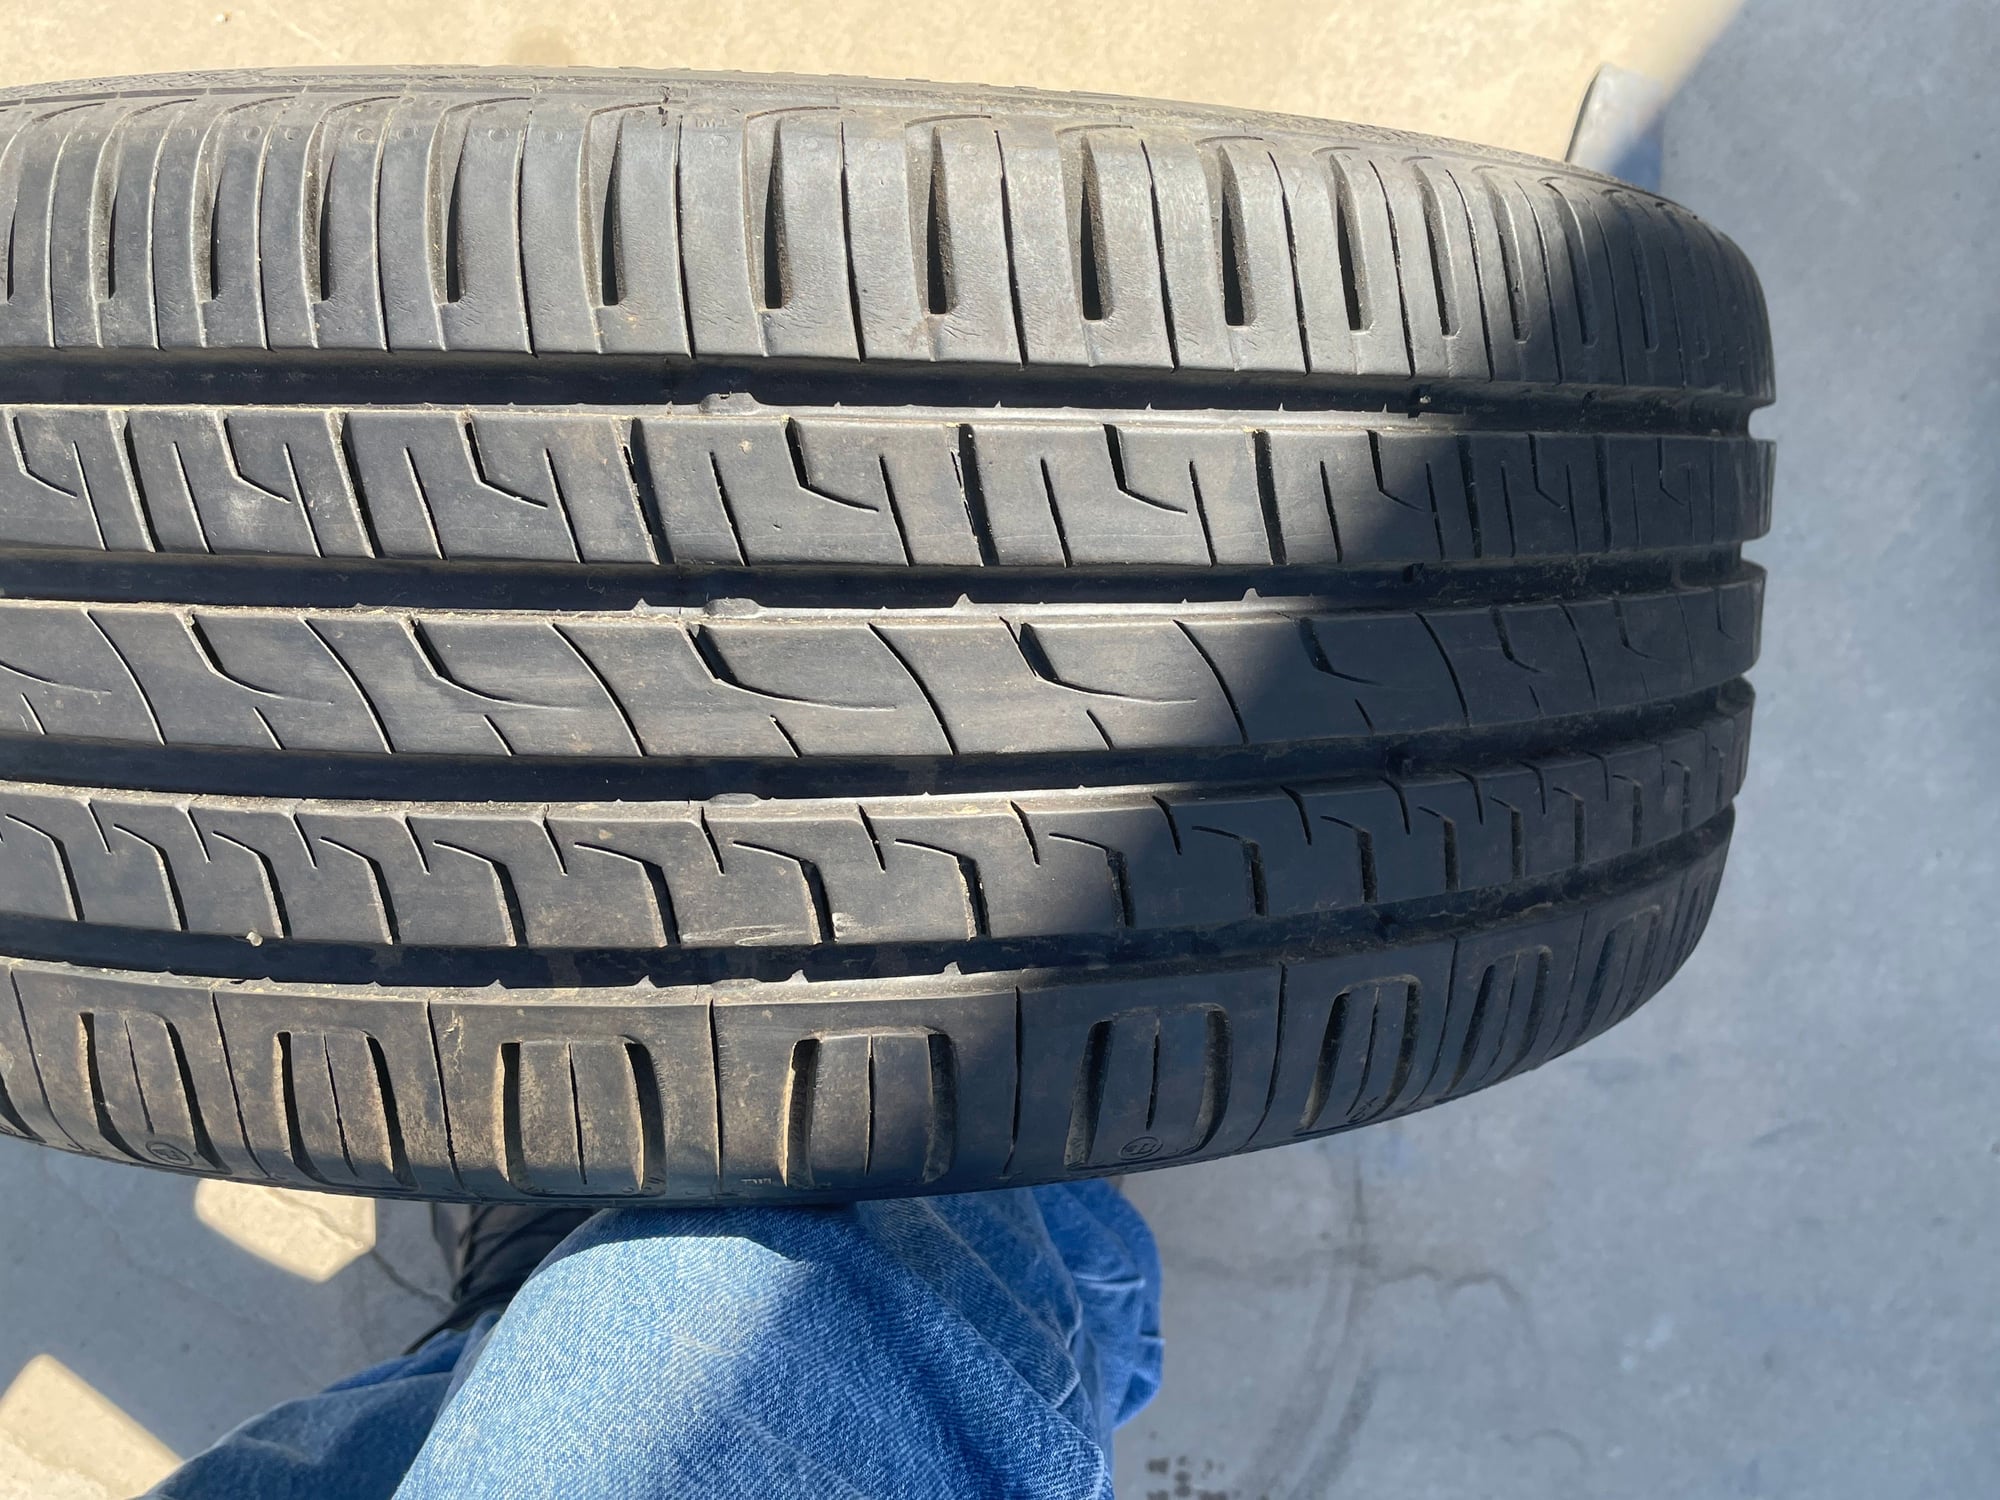 Wheels and Tires/Axles - W204 wheels, tires and TPMS - Used - 2008 to 2013 Mercedes-Benz C300 - Los Angeles, CA 90301, United States